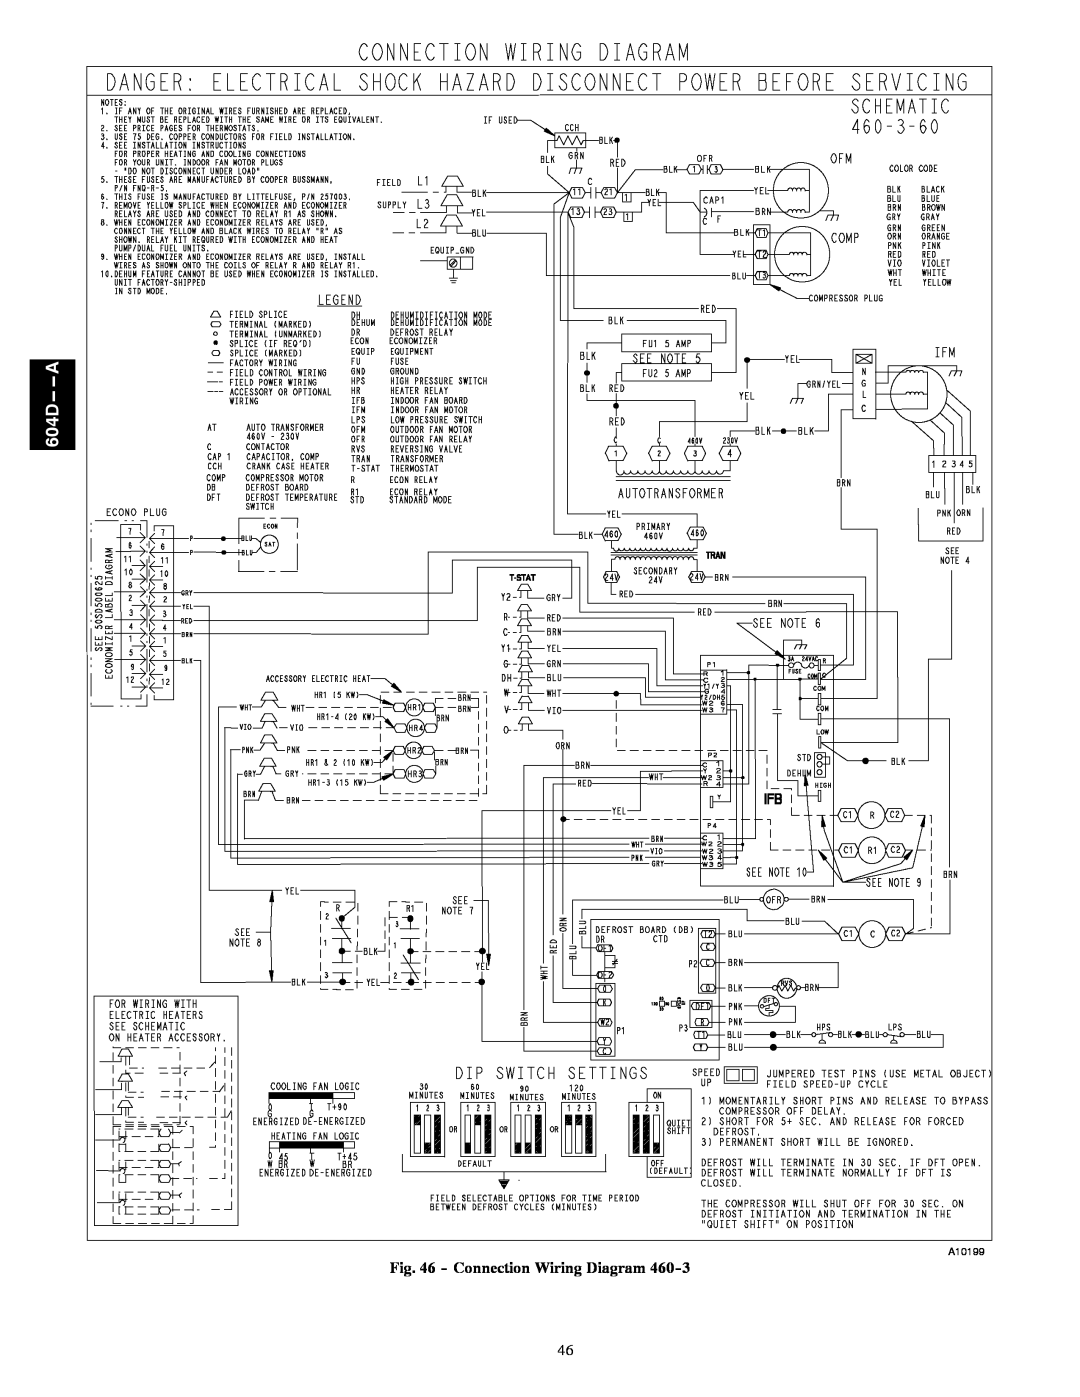 Bryant 604D--A installation instructions Connection Wiring Diagram, 604D A, A10199 